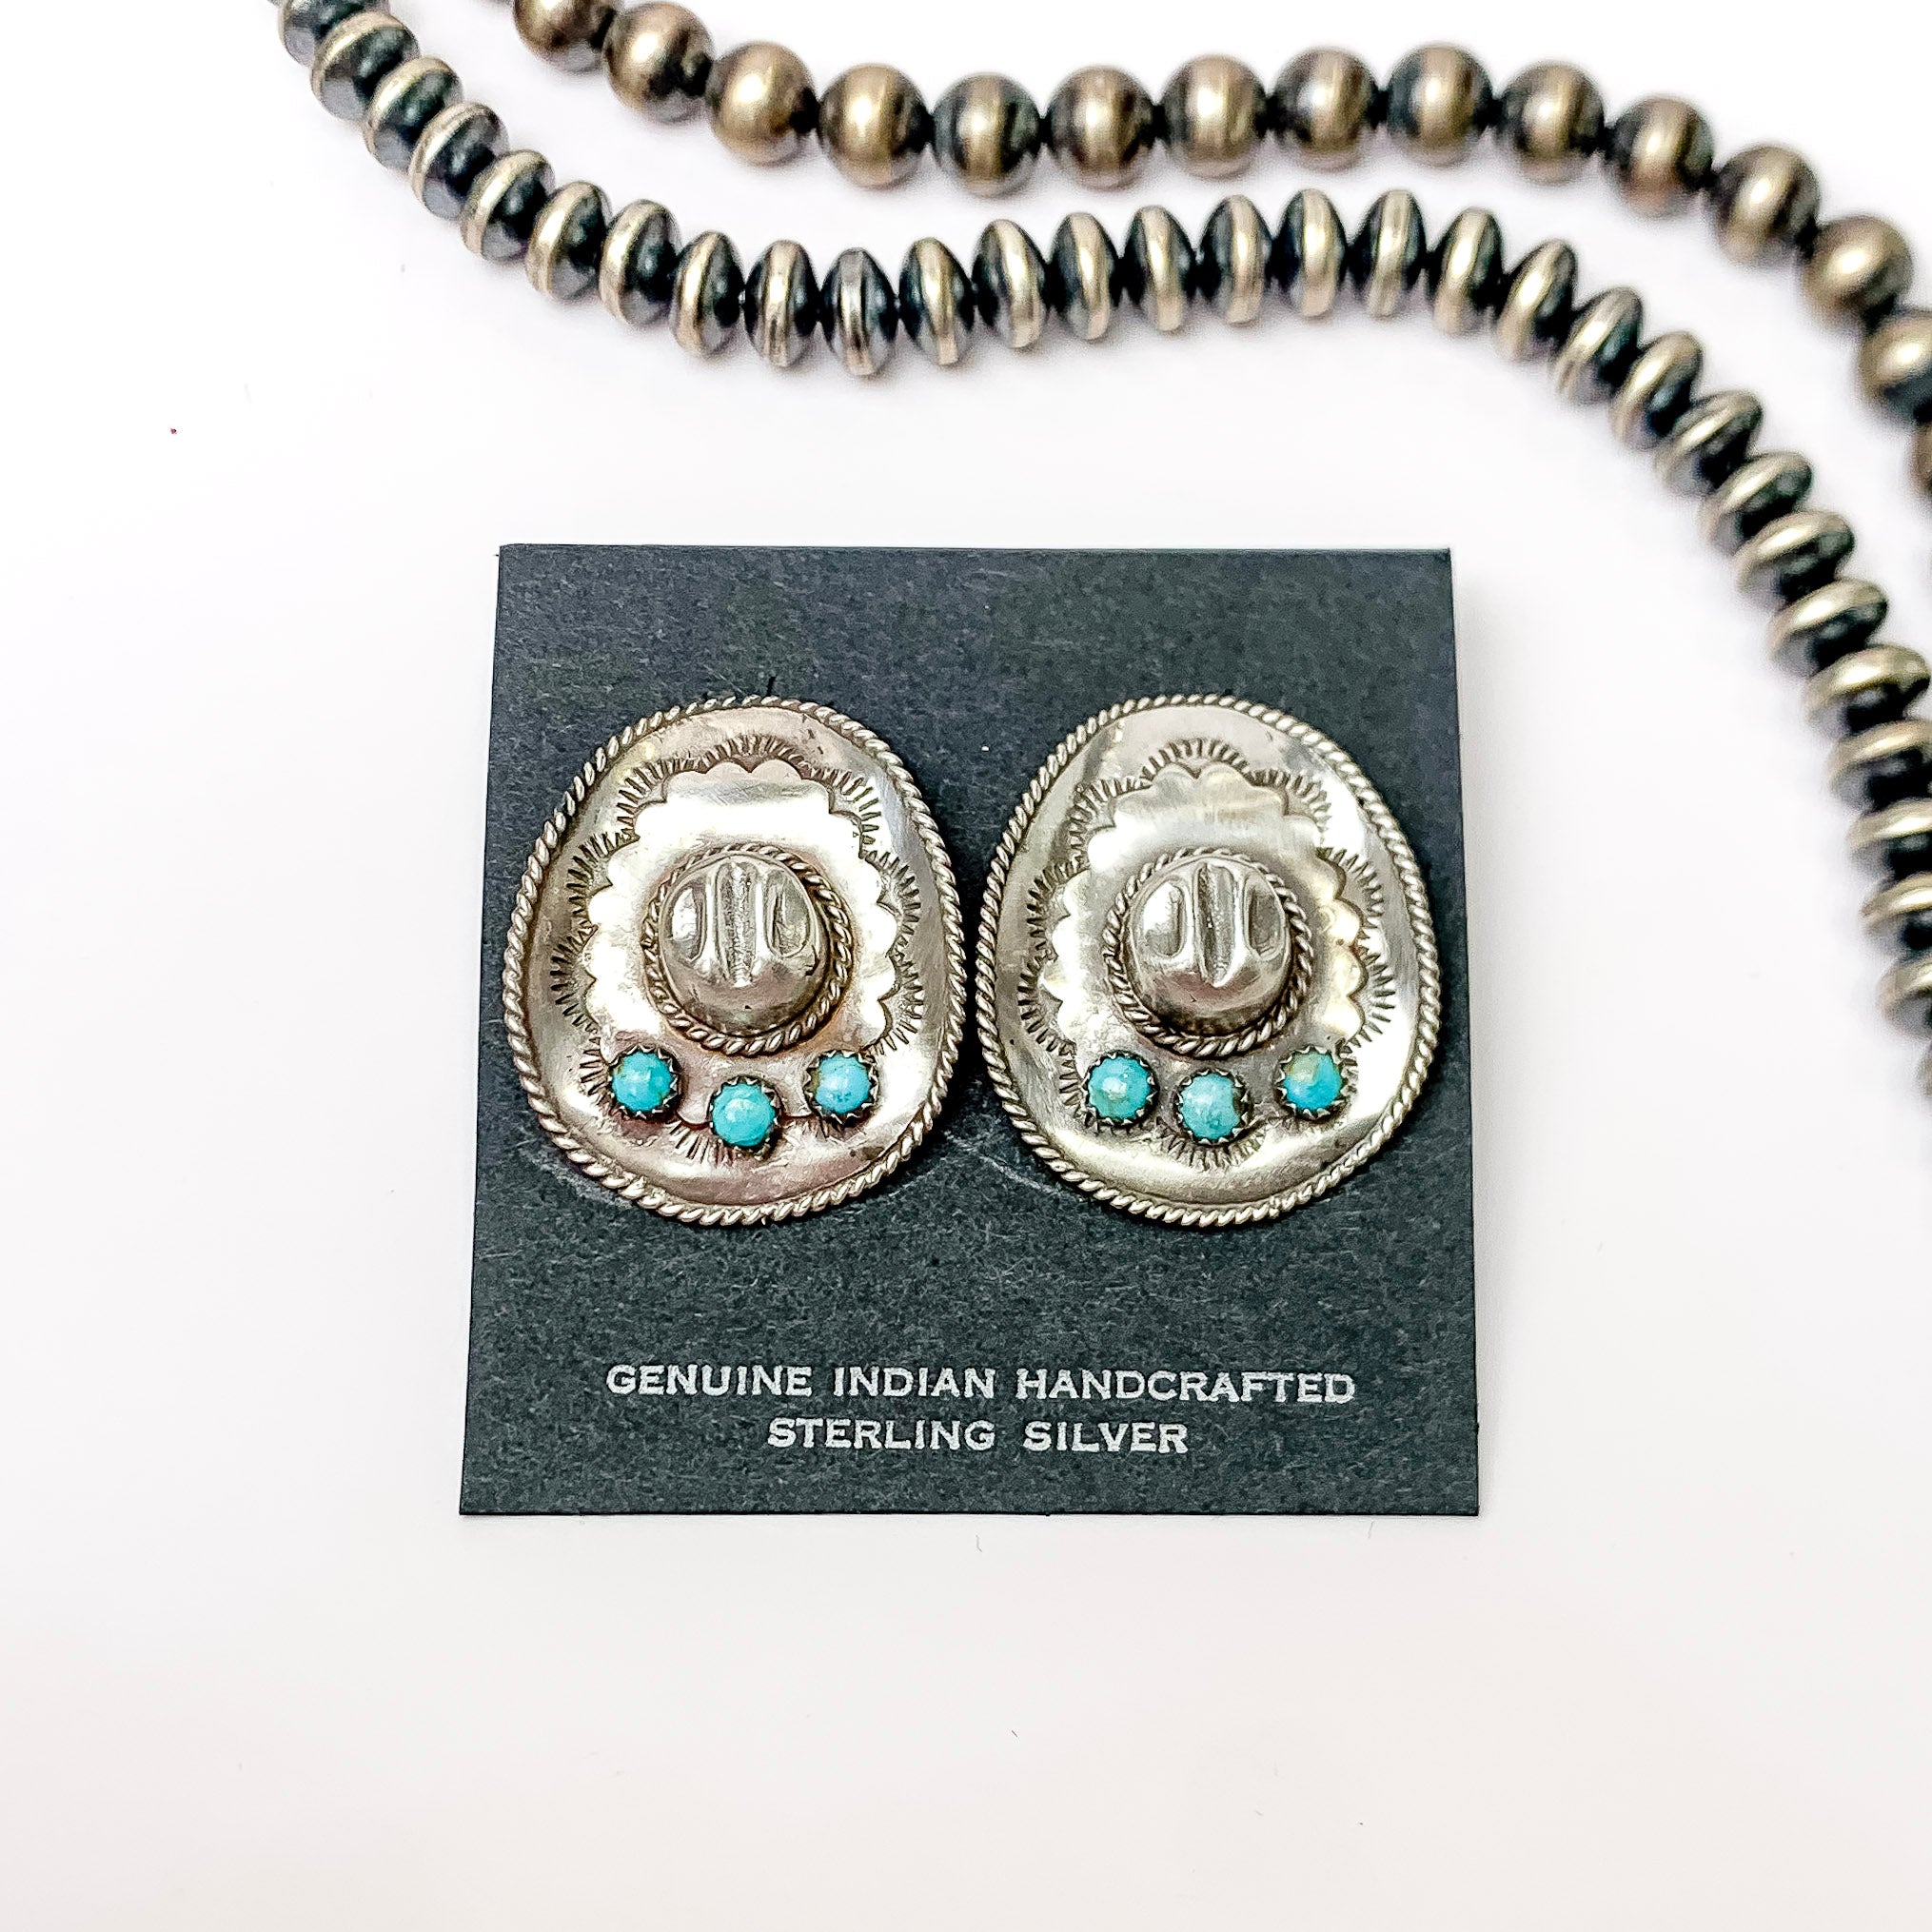 Pam Benally | Navajo Handmade Sterling Silver Cowgirl Hat Stud Earrings with Three Small Turquoise Stones - Giddy Up Glamour Boutique